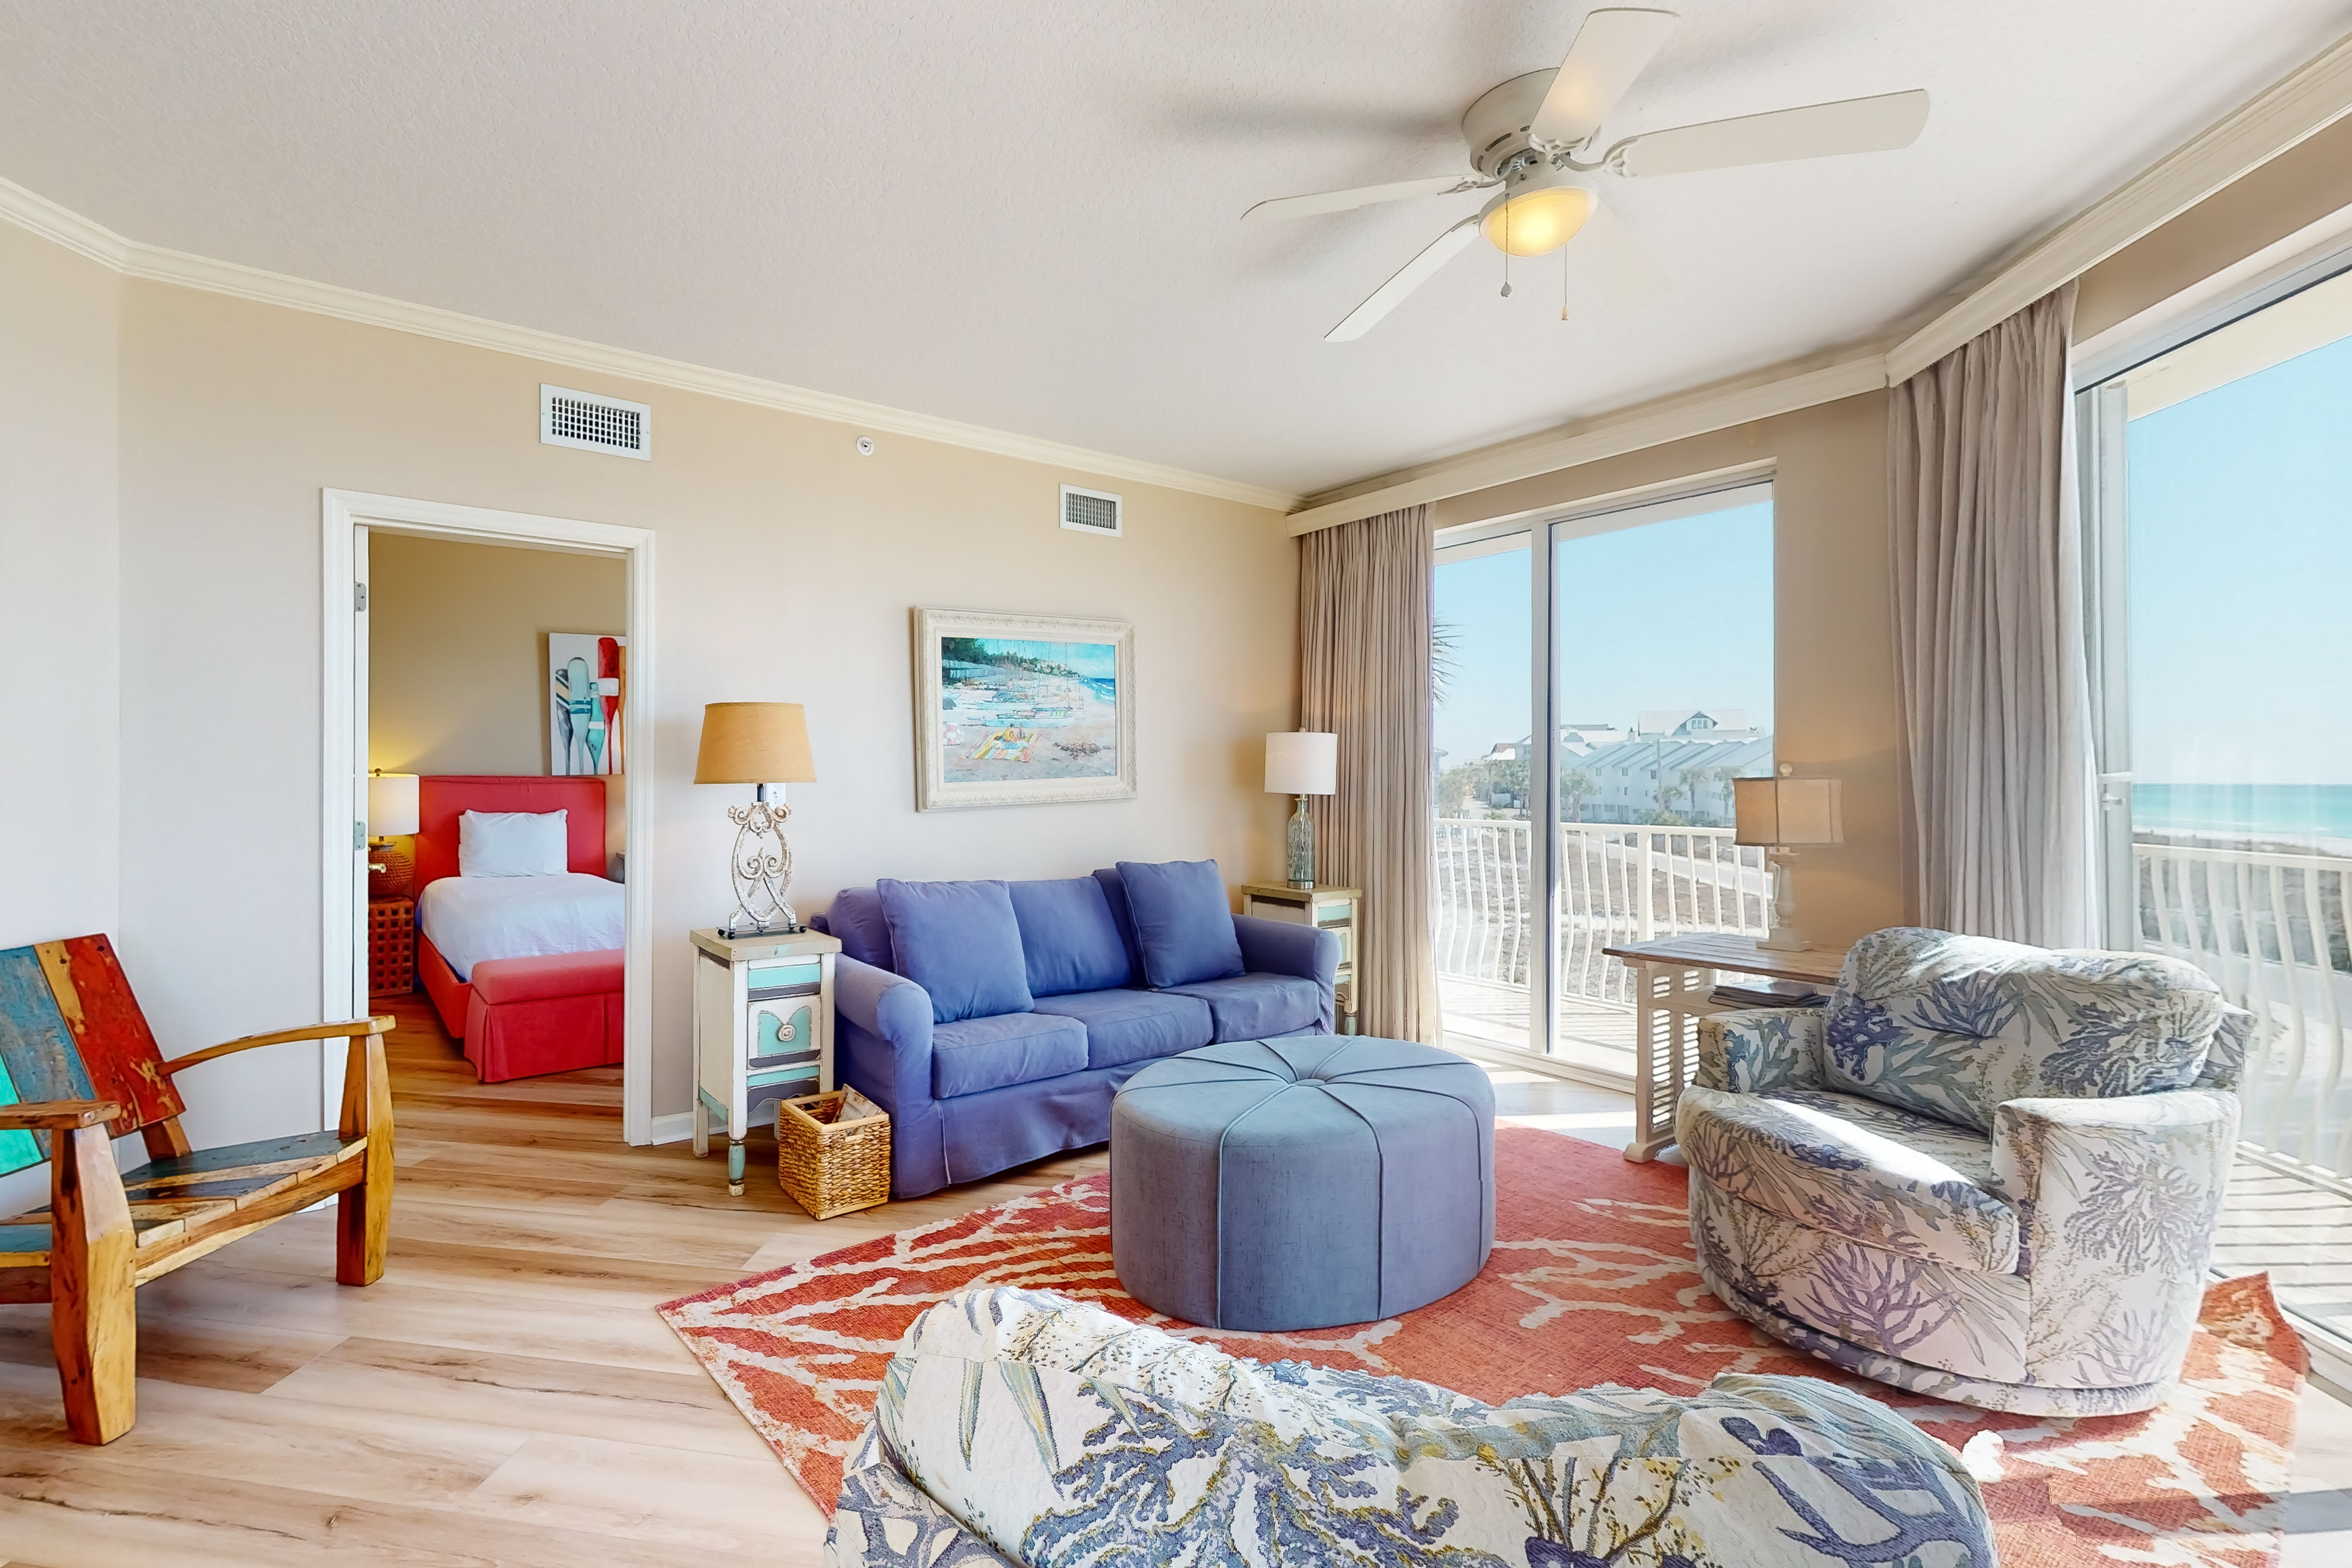 Dunes of Seagrove A209 Condo rental in Dunes of Seagrove in Highway 30-A Florida - #1